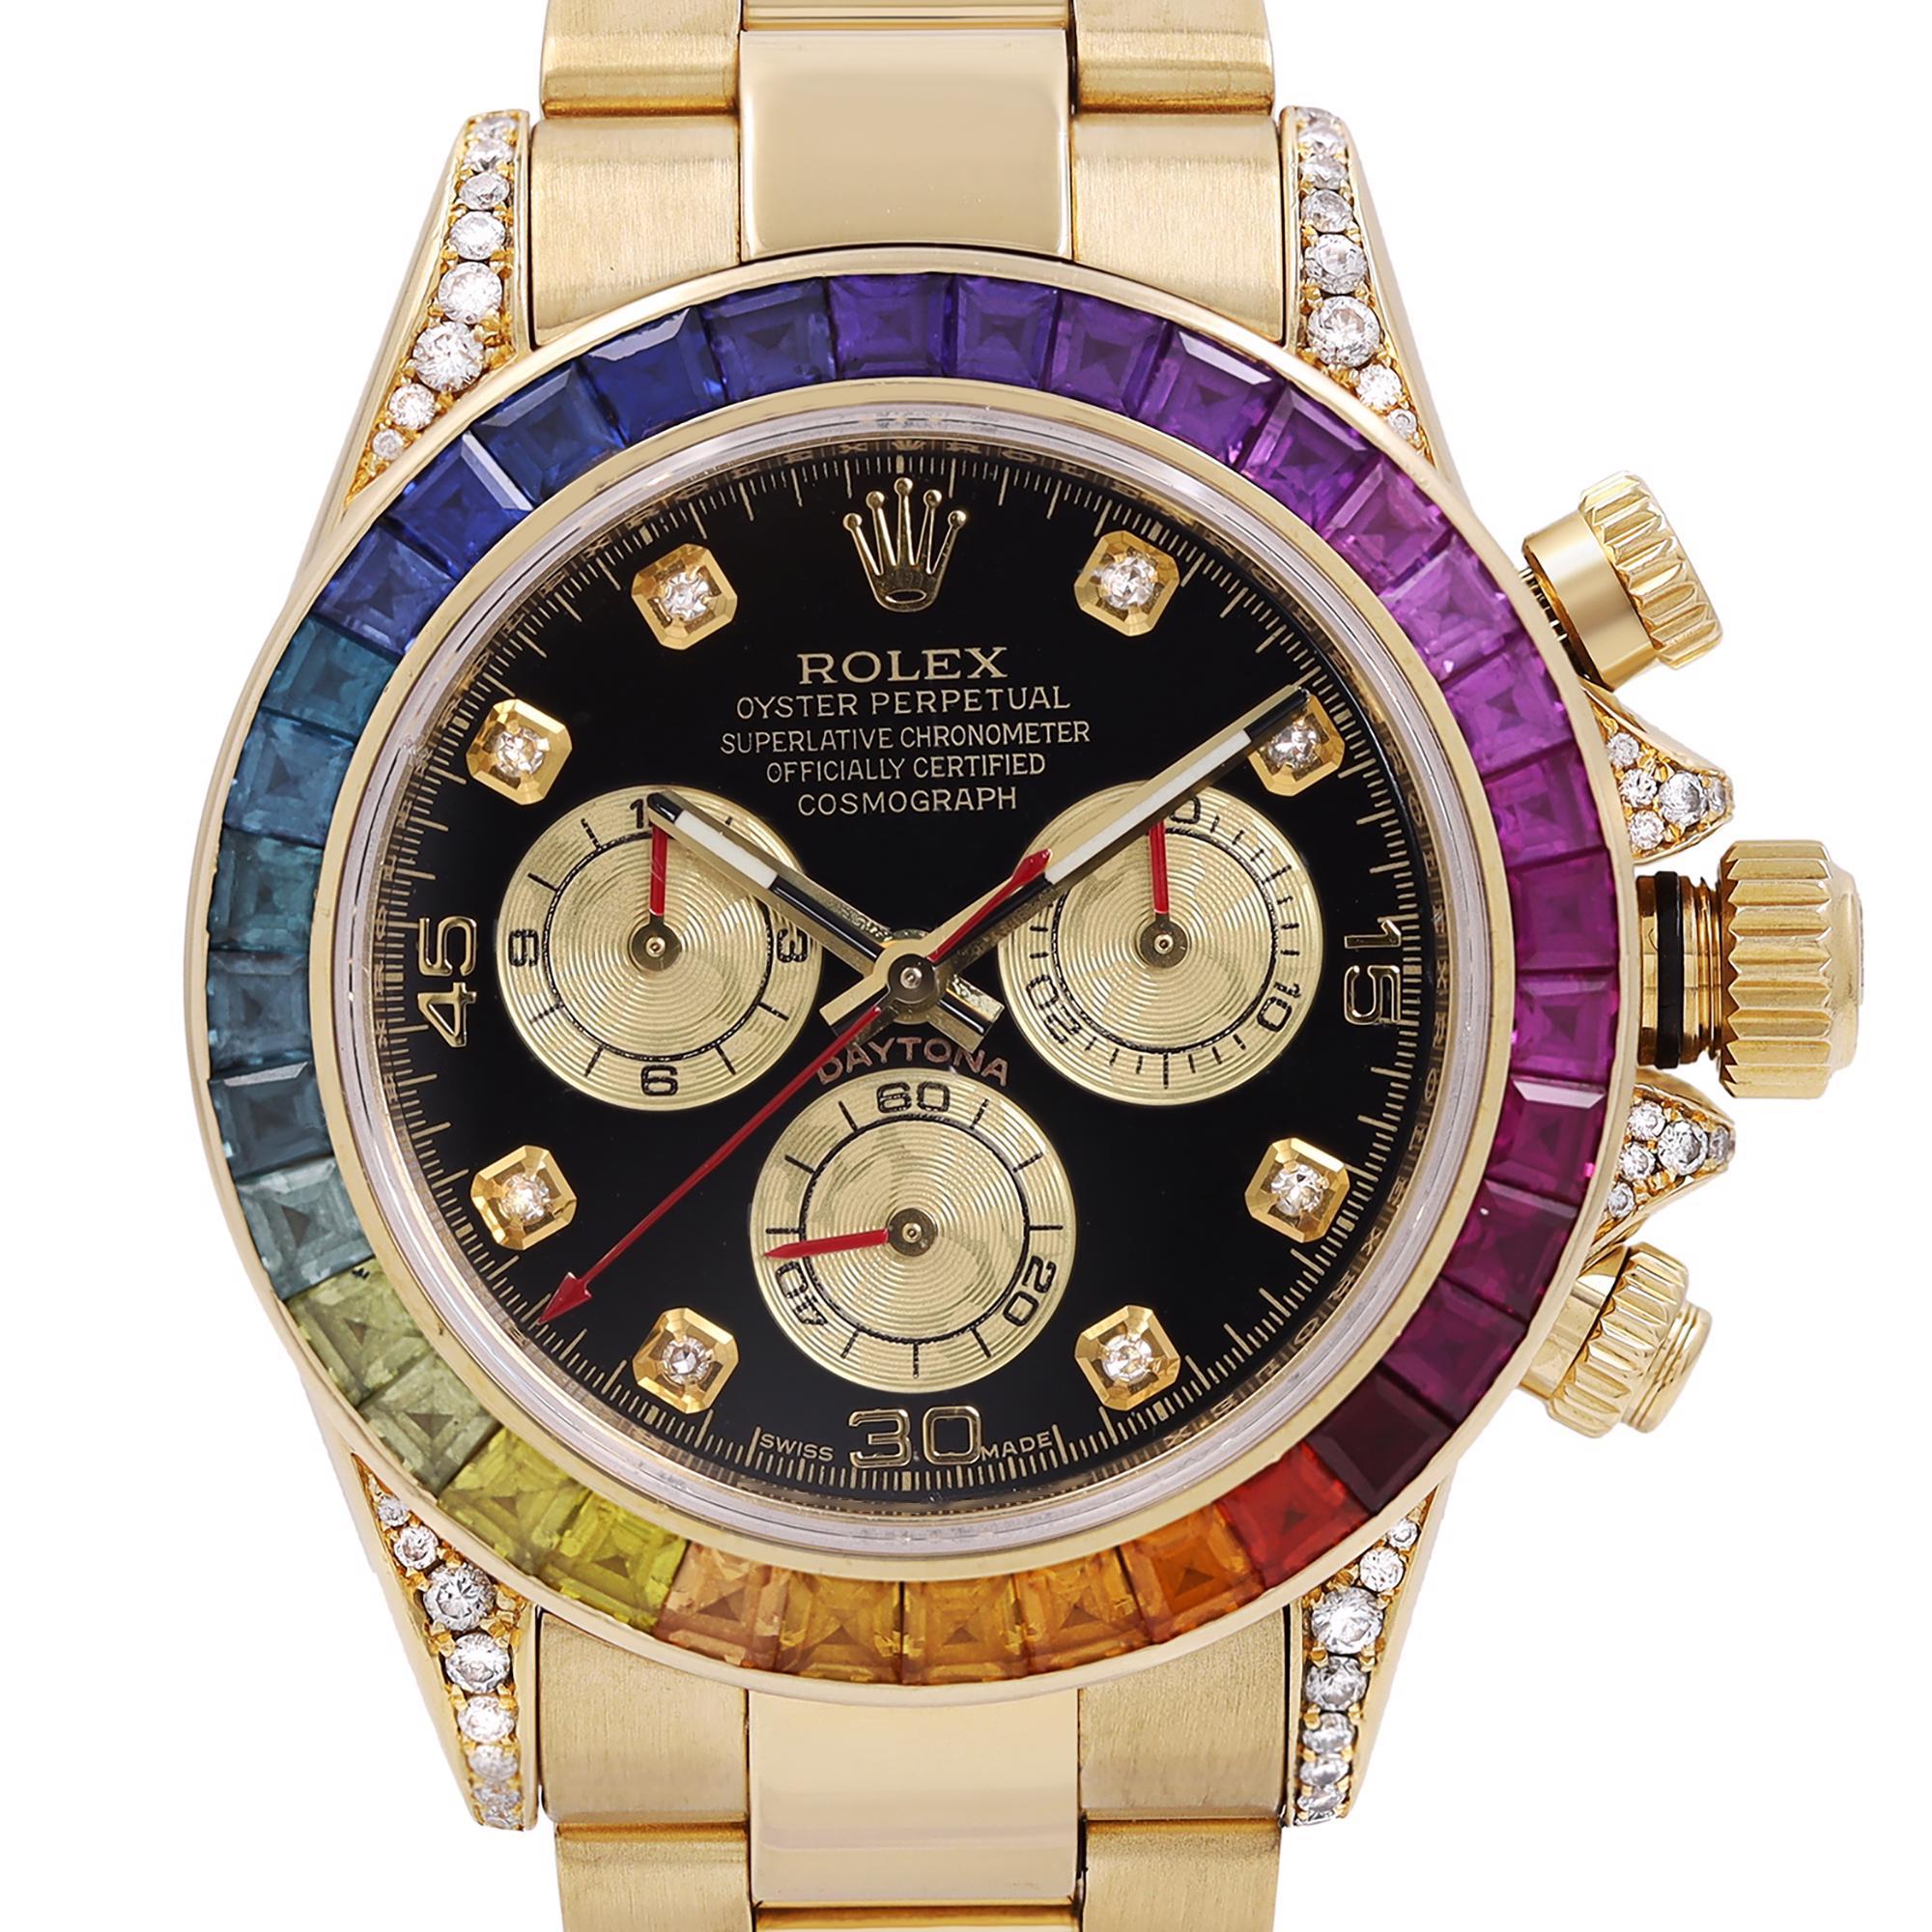 Pre-owned Rolex Daytona Yellow Gold Custom Bezel and Custom Black Diamond Dial Automatic Watch 116528. The bezel is 14k Gold. This Beautiful Timepiece is Powered by an Automatic Movement that Features: 18k Yellow Gold Case with Custom Diamond Lugs